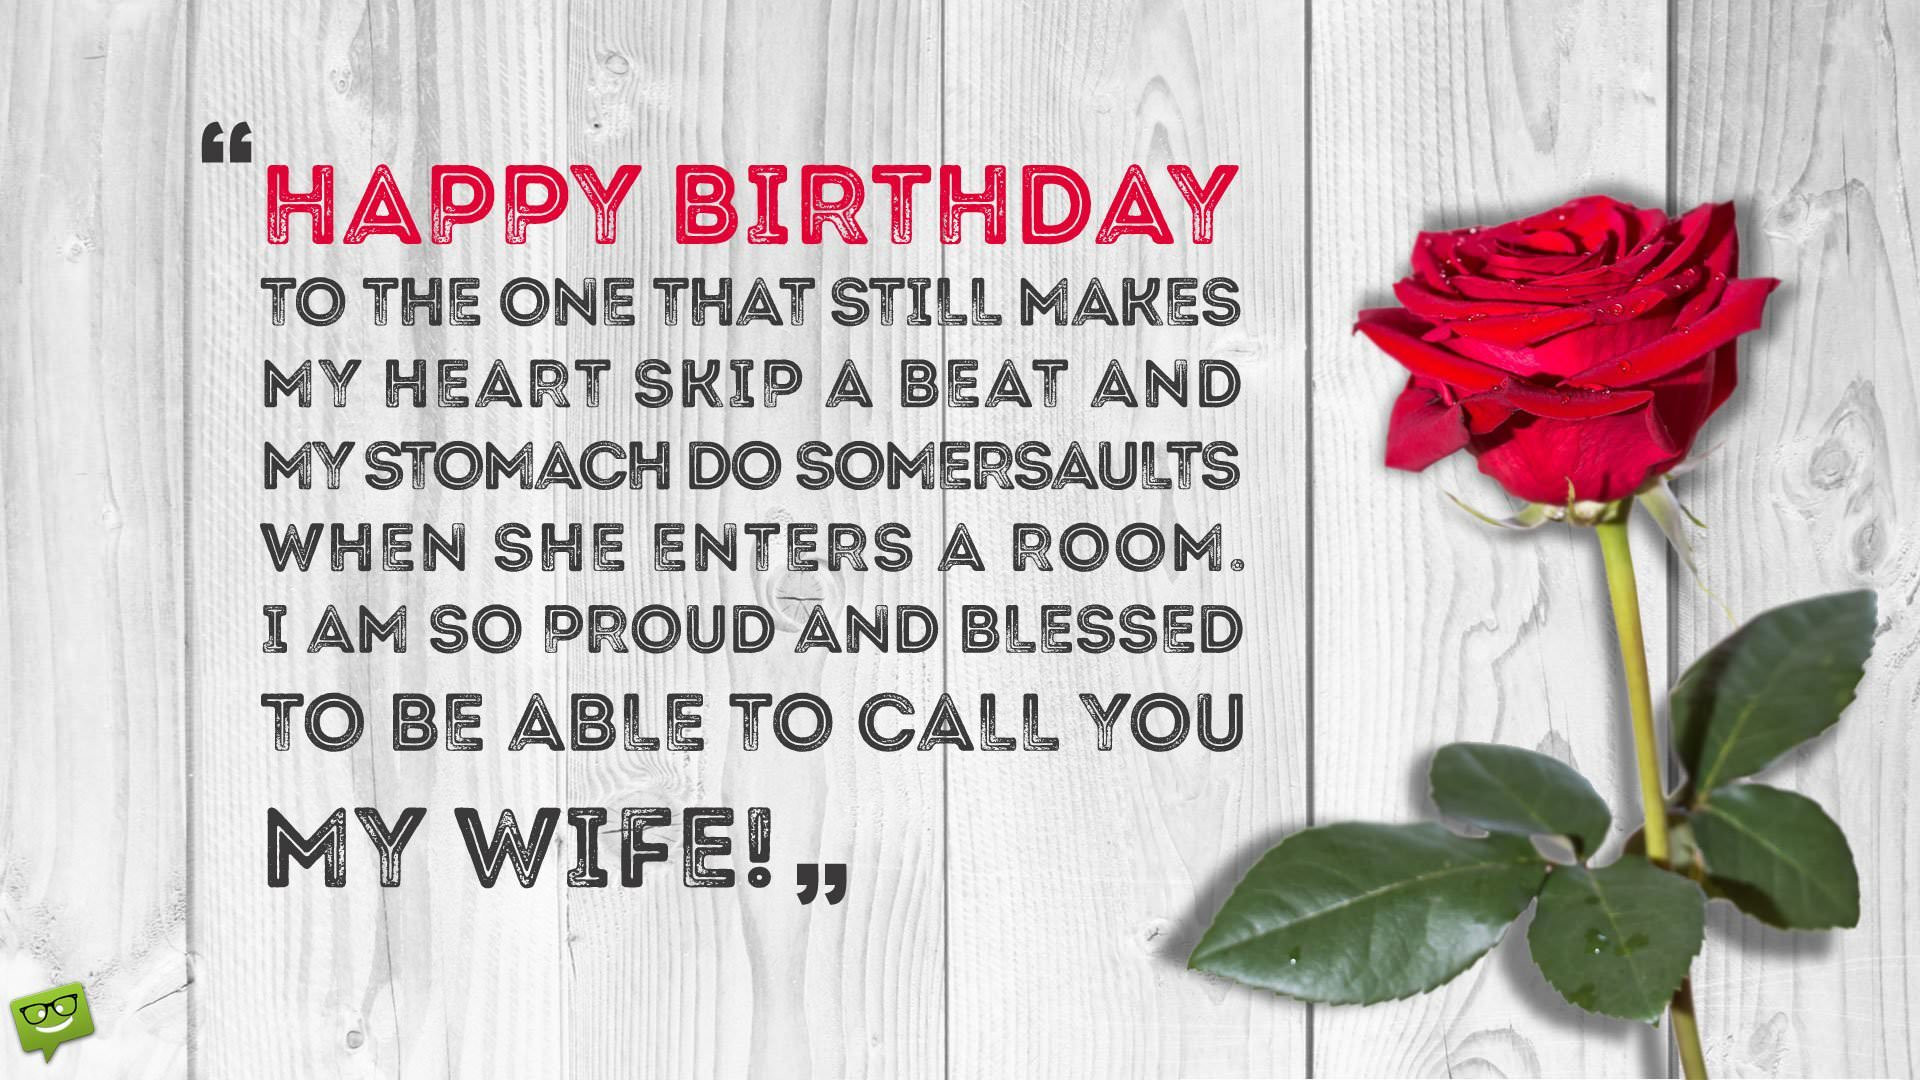 Happy Birthday Wishes For Wife
 Romantic Birthday Wishes for your Wife